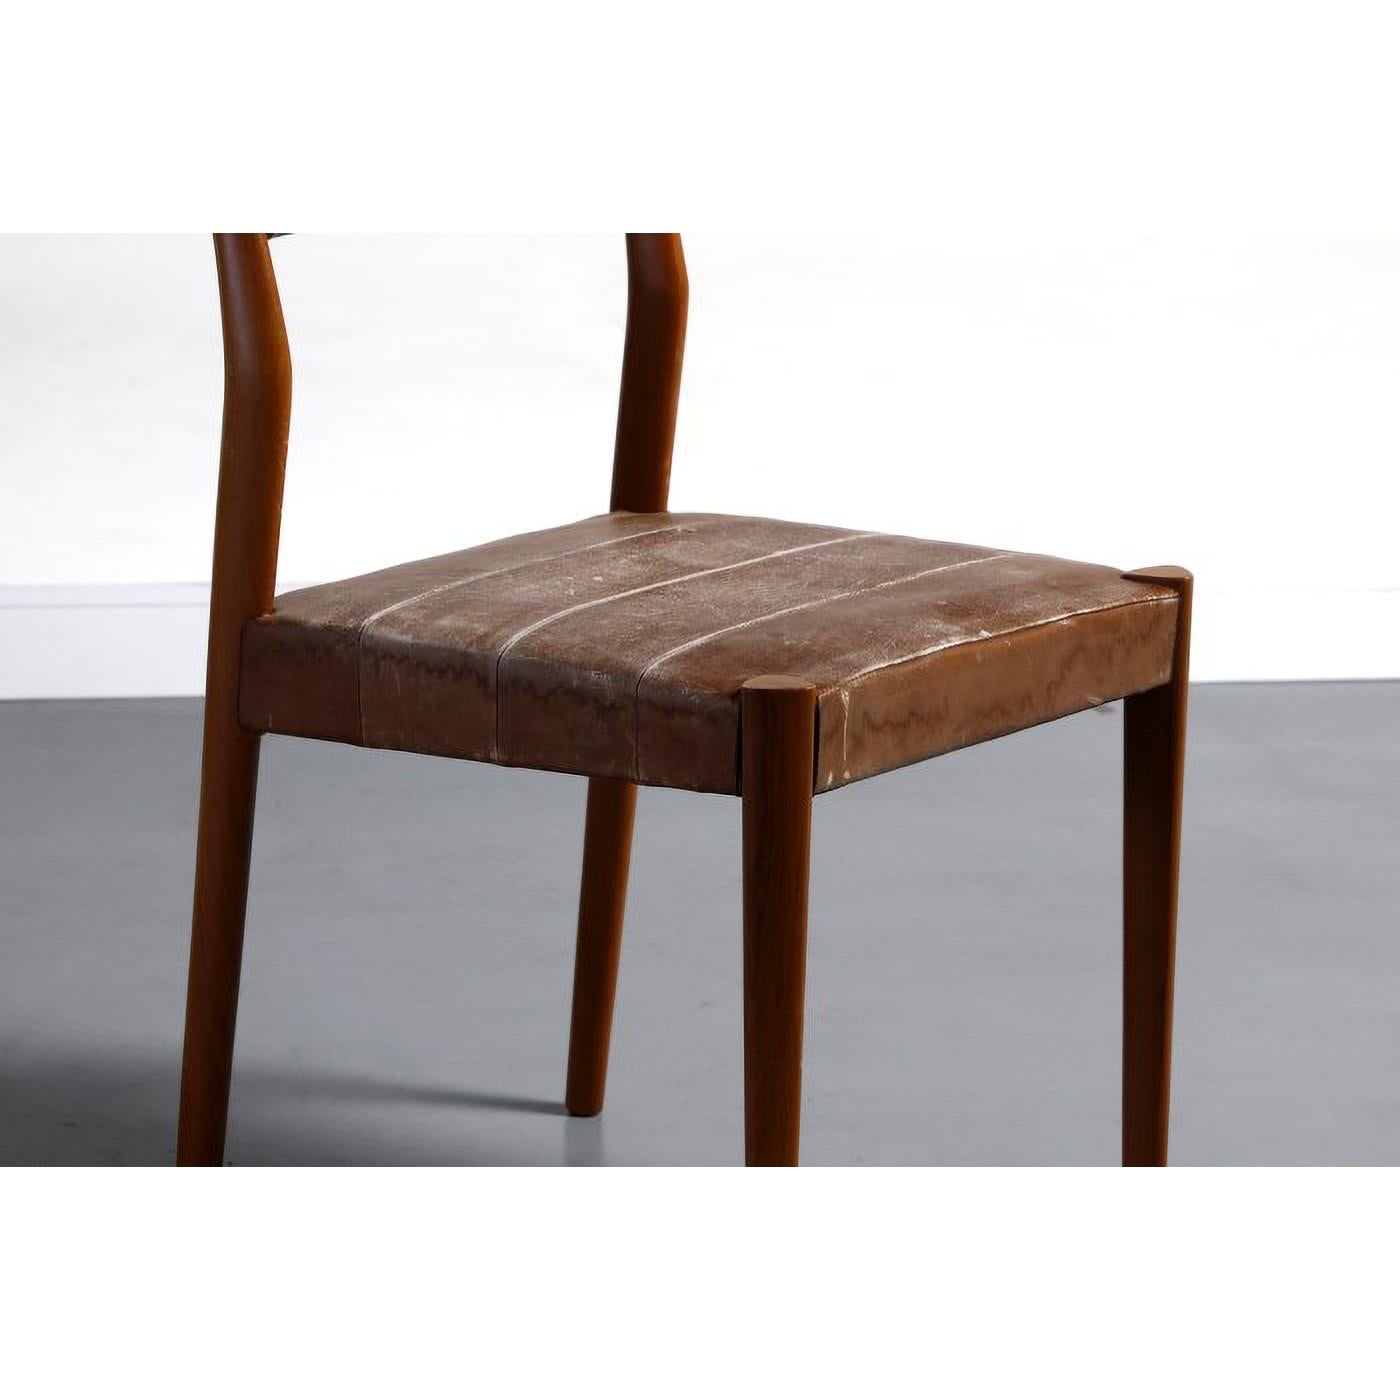 Mid-Century Modern 4 Chairs by Moller Niels Leather from Mollers Mobel Fabrik, Denmark 60s For Sale